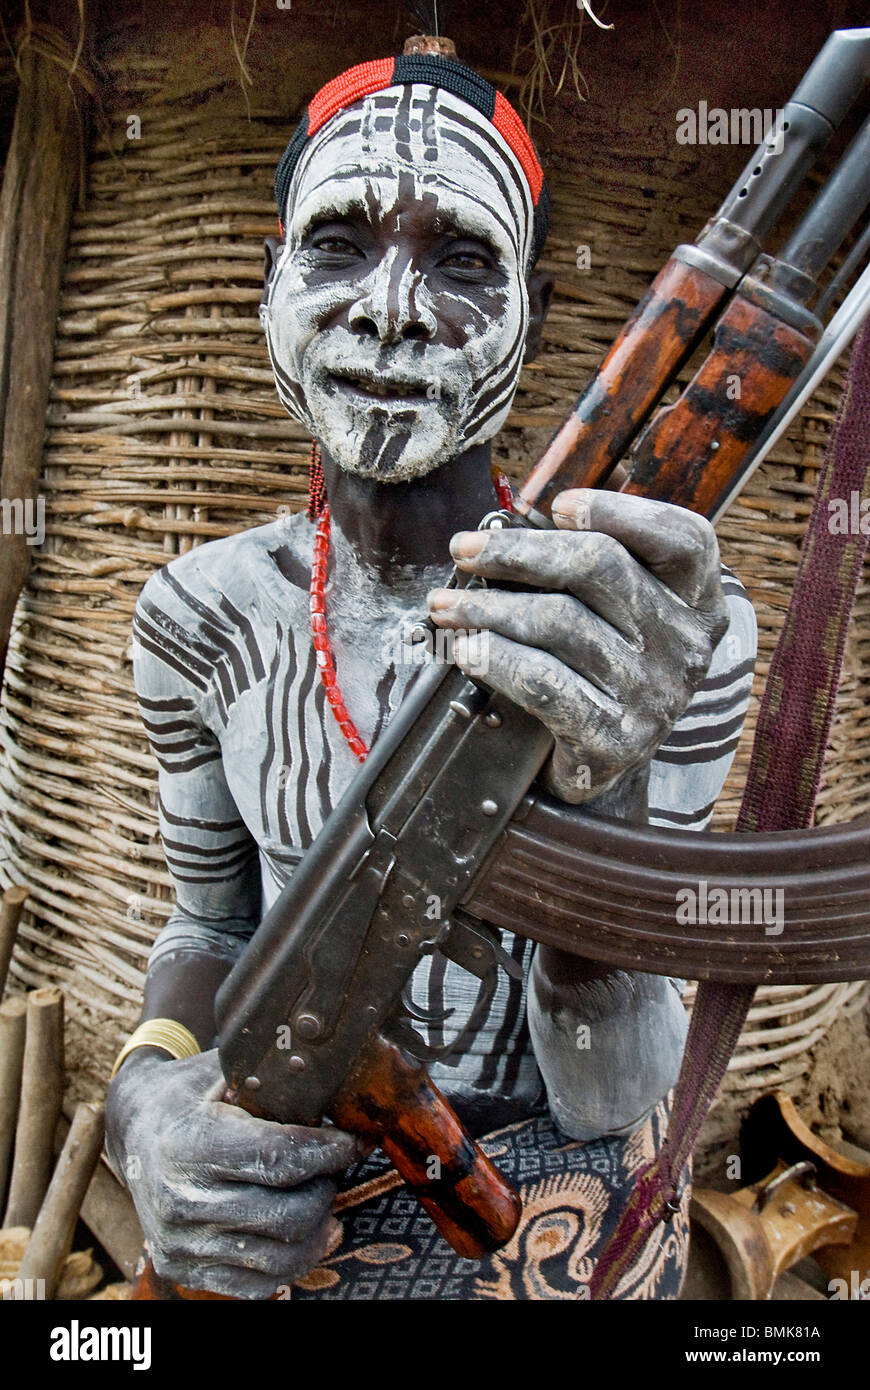 Ethiopia Lower Omo River Basin Chelete a Duss tribal communitiy man with body and face paint holding AK 47 in front of granary Stock Photo